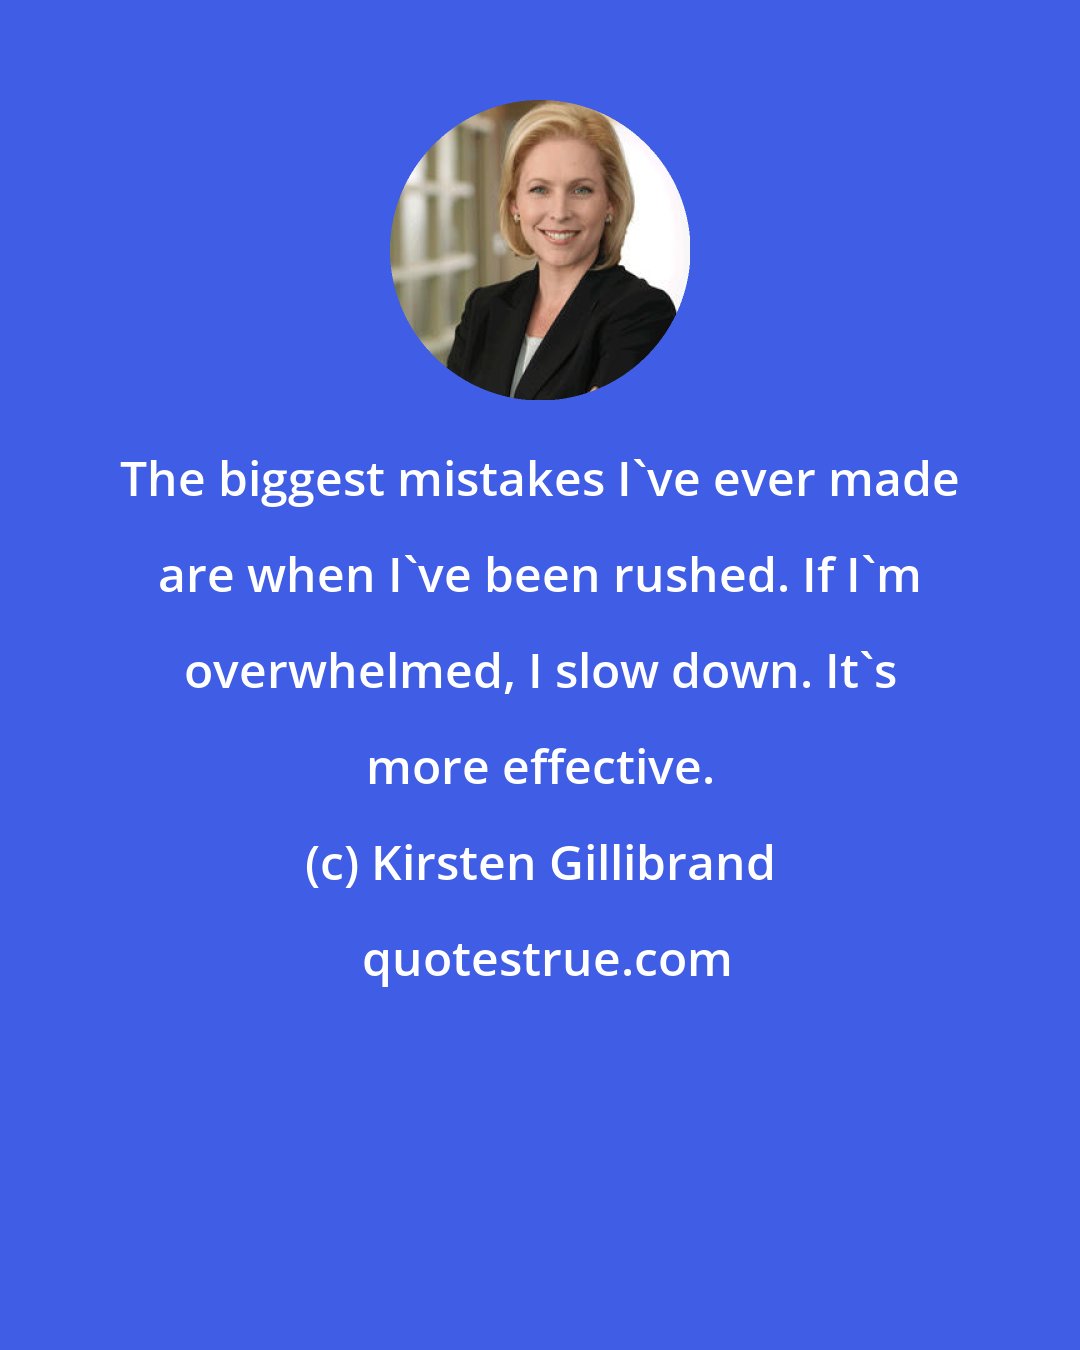 Kirsten Gillibrand: The biggest mistakes I've ever made are when I've been rushed. If I'm overwhelmed, I slow down. It's more effective.